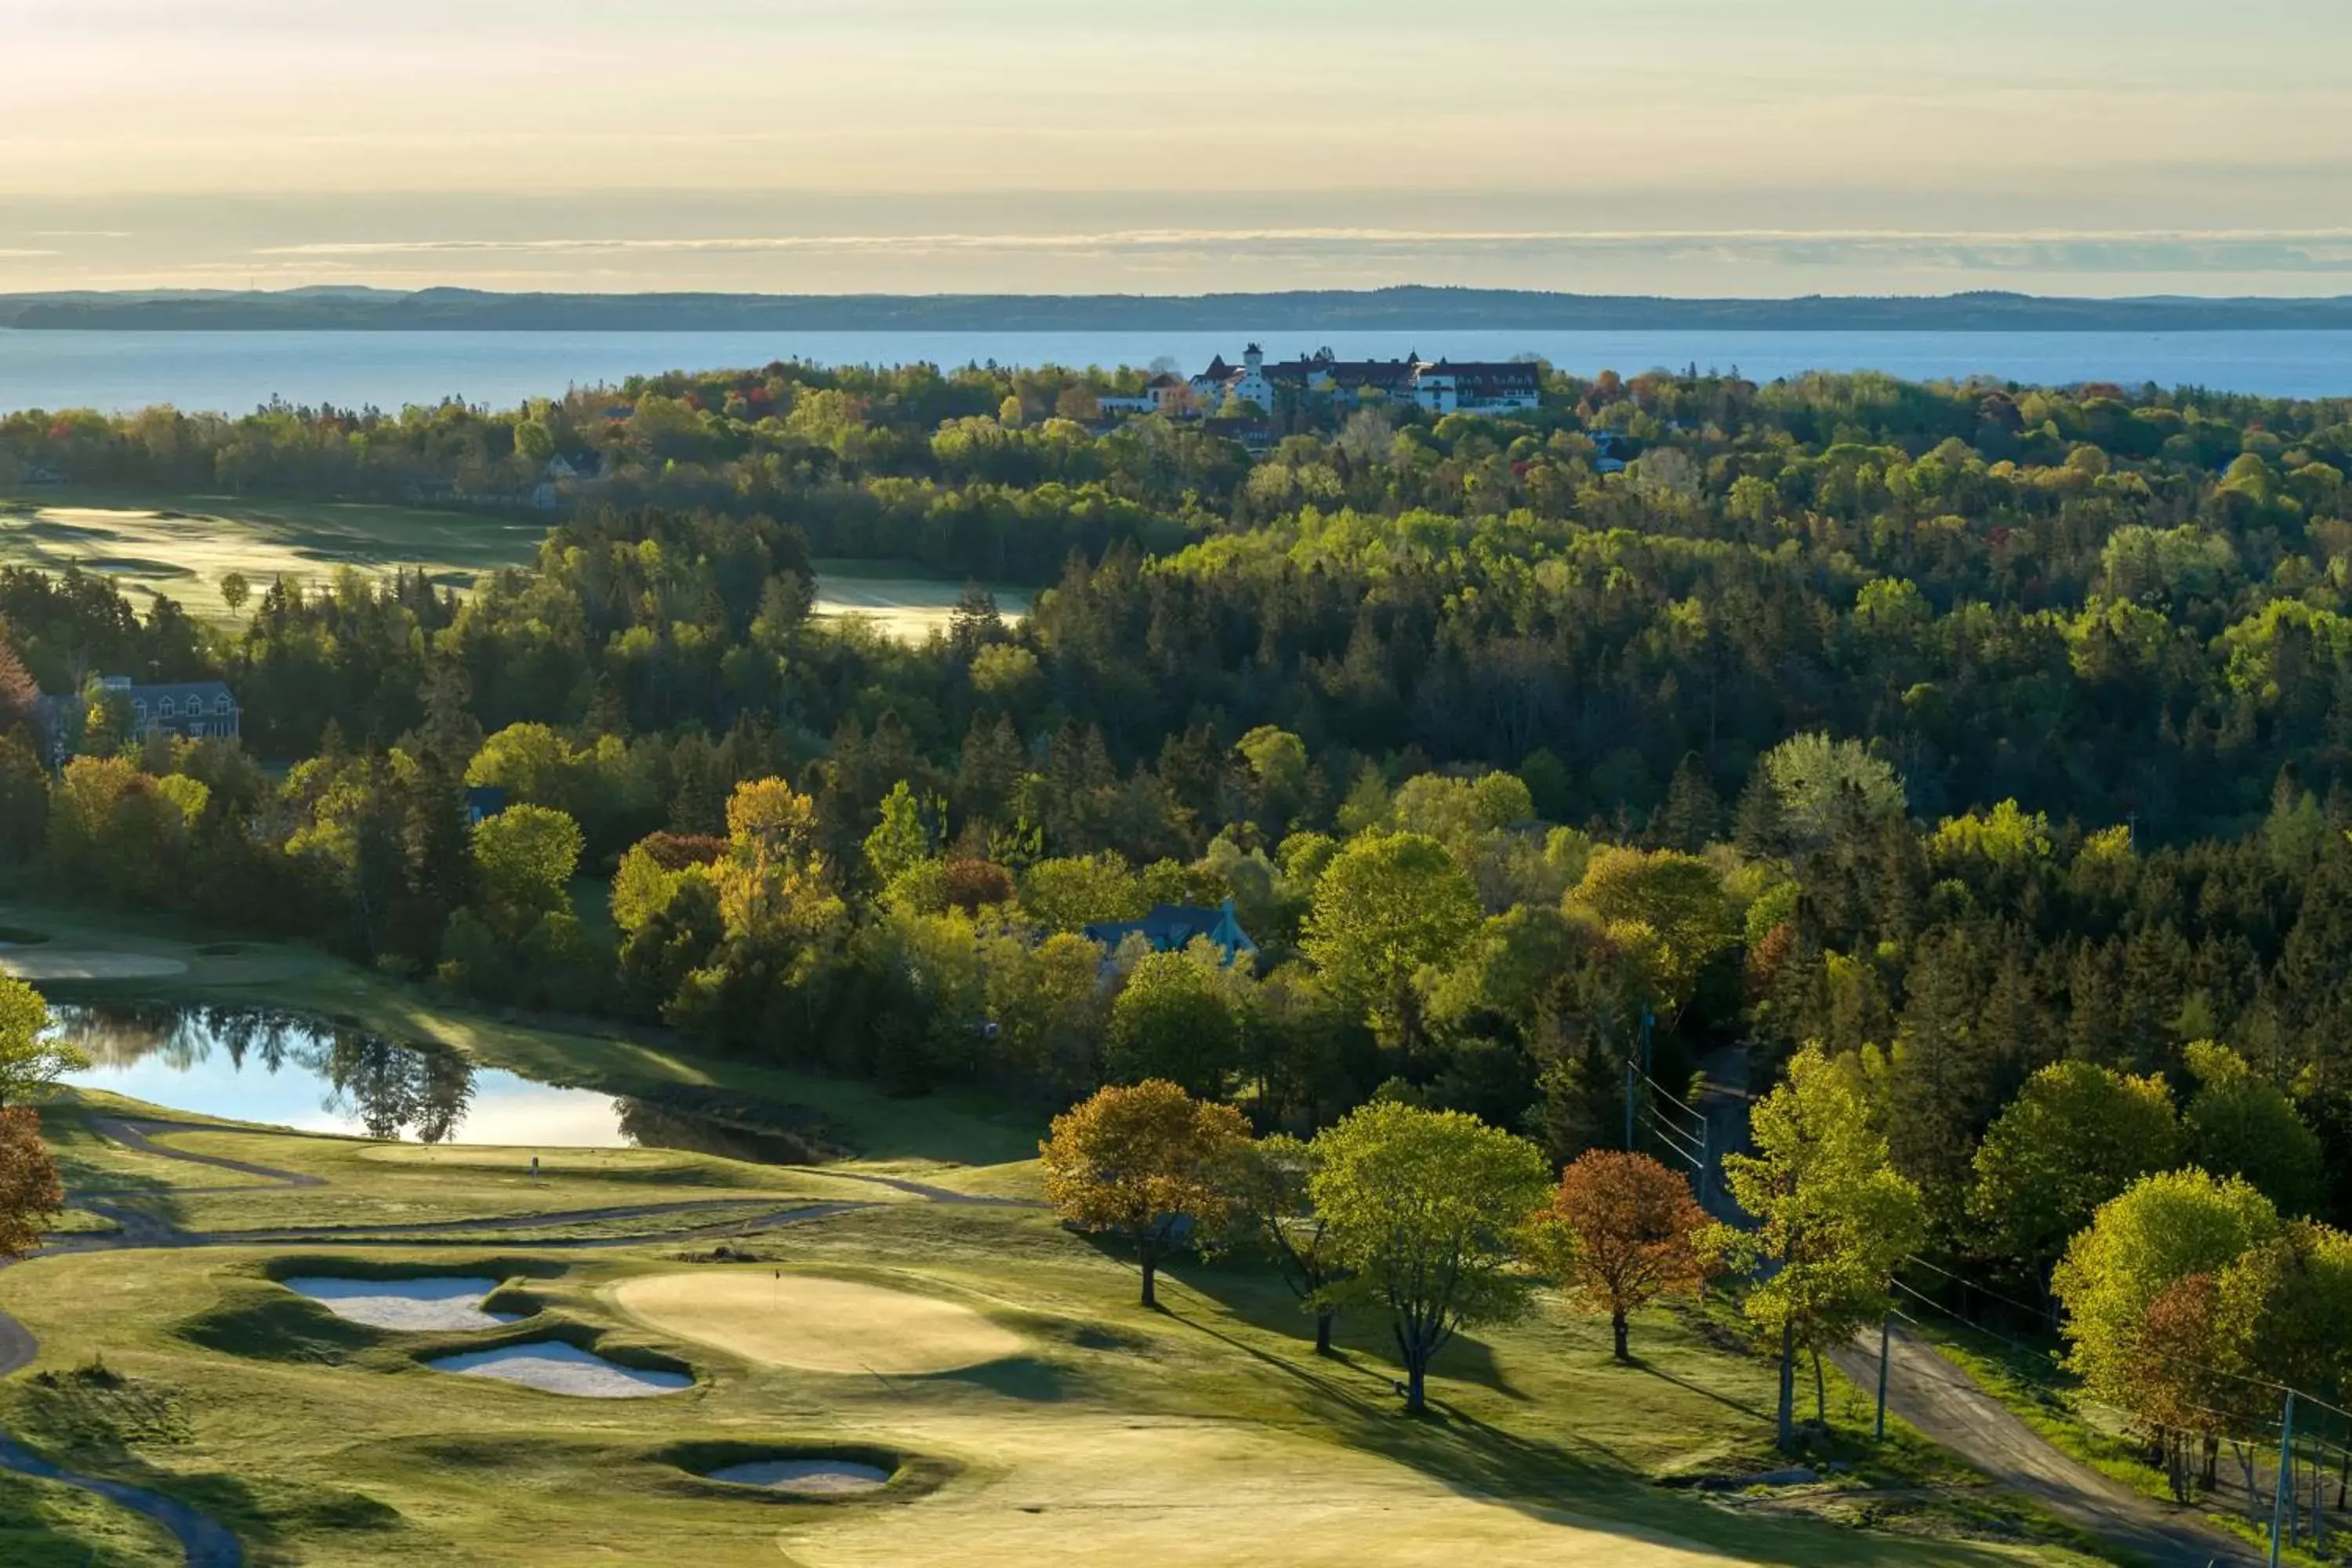 Golfcourse, Bird's-eye View in The Algonquin Resort St. Andrews by-the-Sea, Autograph Collection